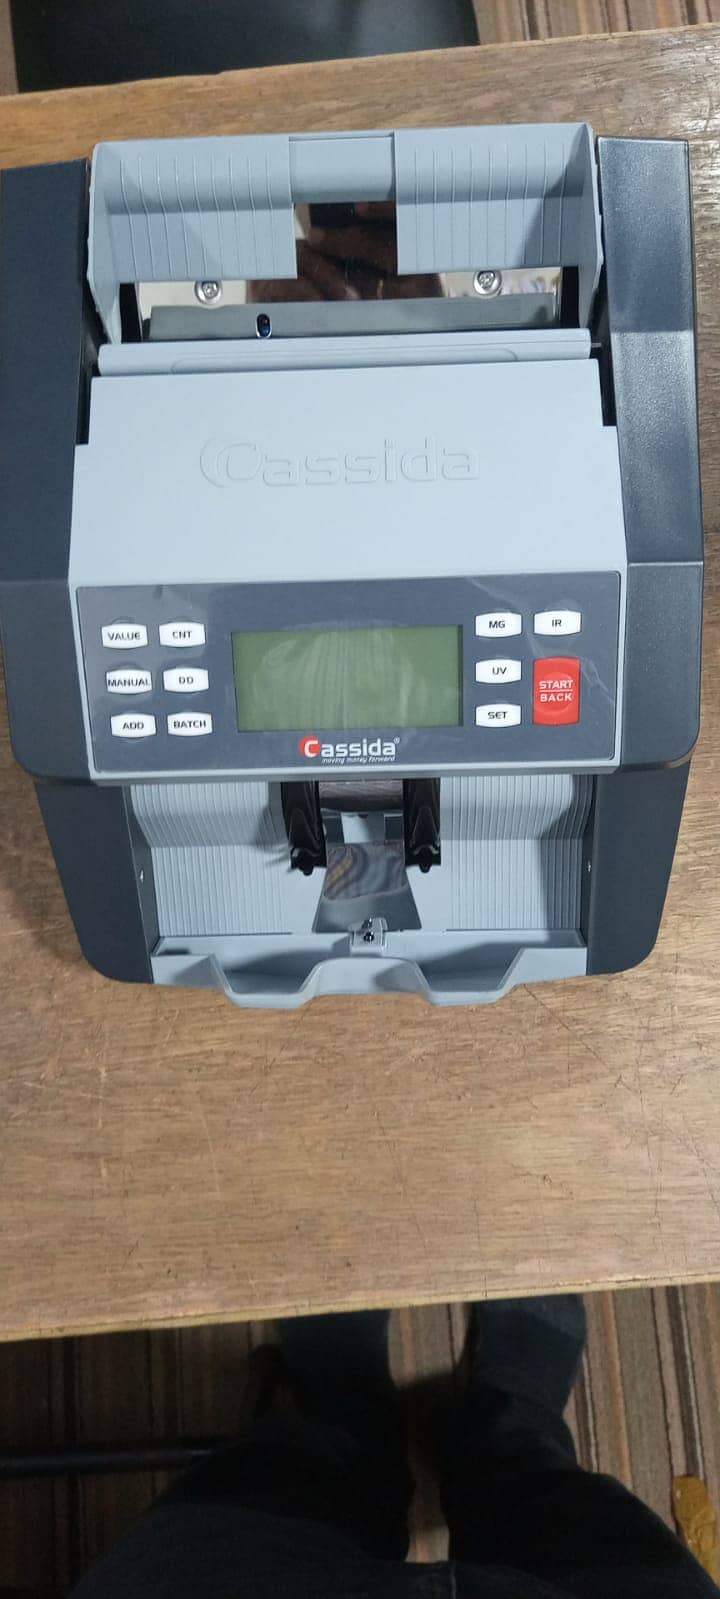 Cash note counting machine in Pakistan with fake note detection 19